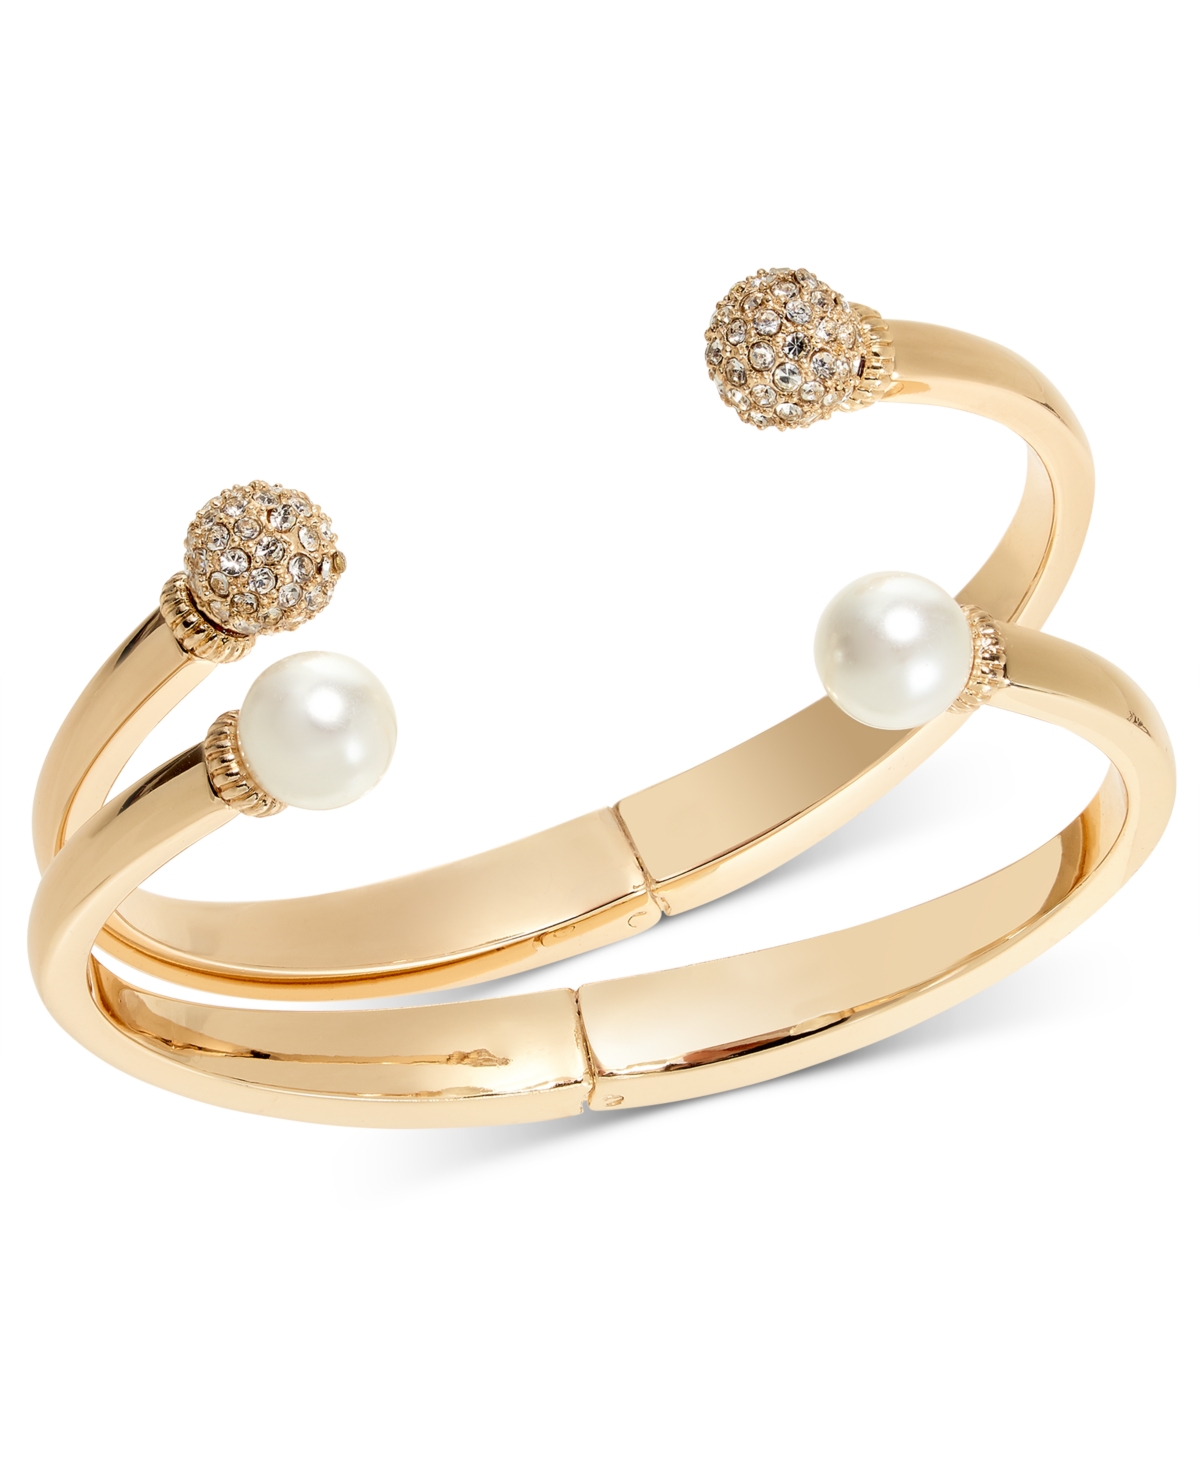 Gold-Tone 2-Pc. Set Pave Fireball & Imitation Pearl Cuff Bracelets, Created for Macy's - Gold